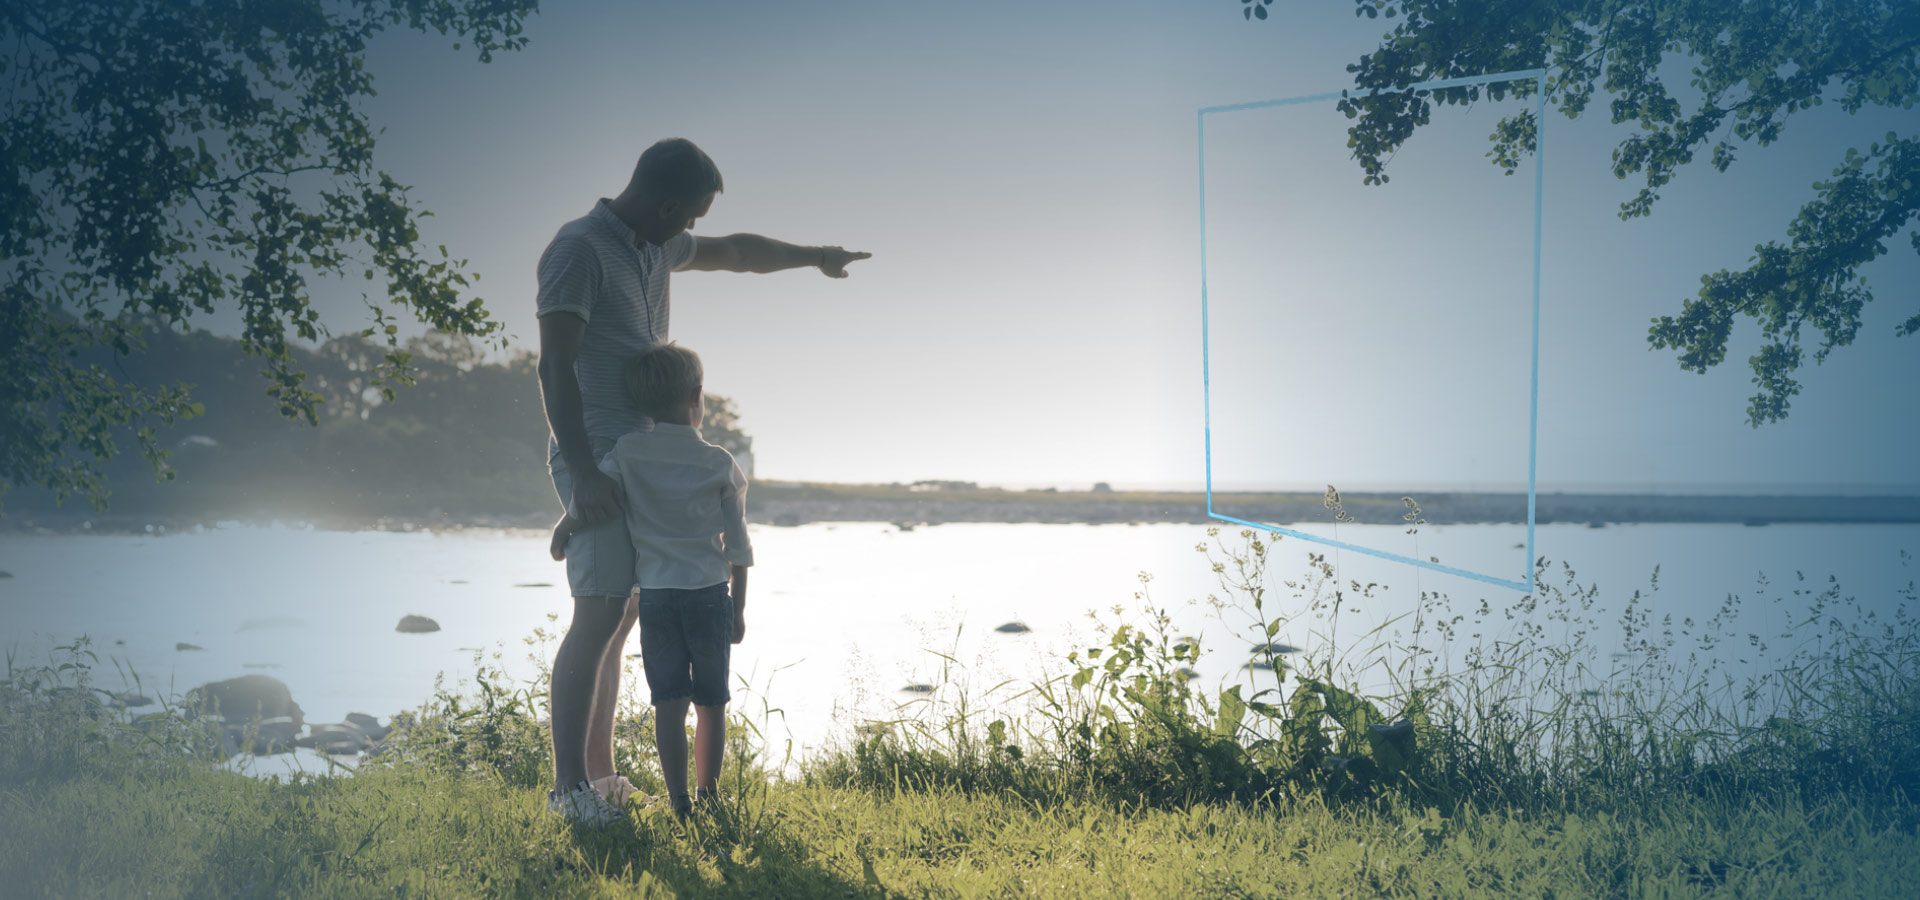 A man stands on the side of a lake with a young boy in his arms. The father is pointing into the distance above the water while his son watches curiously. The sun illuminates the lake's surface and the surrounding trees.